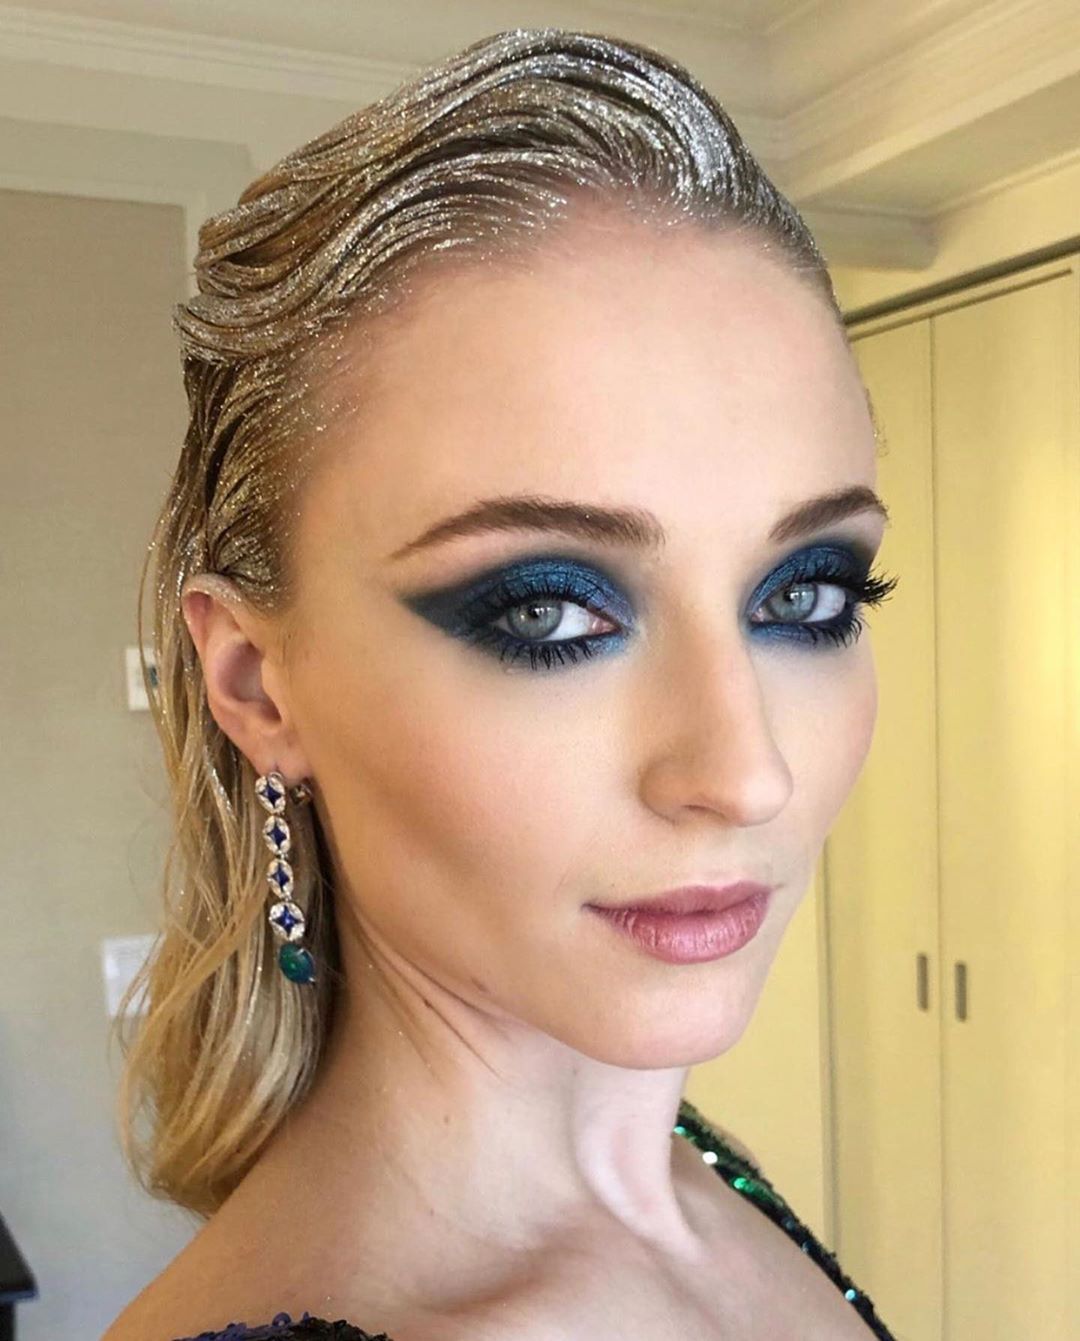 The Most Unforgettable Met Gala Beauty Looks—According to the Hair and Makeup Artists Behind Them